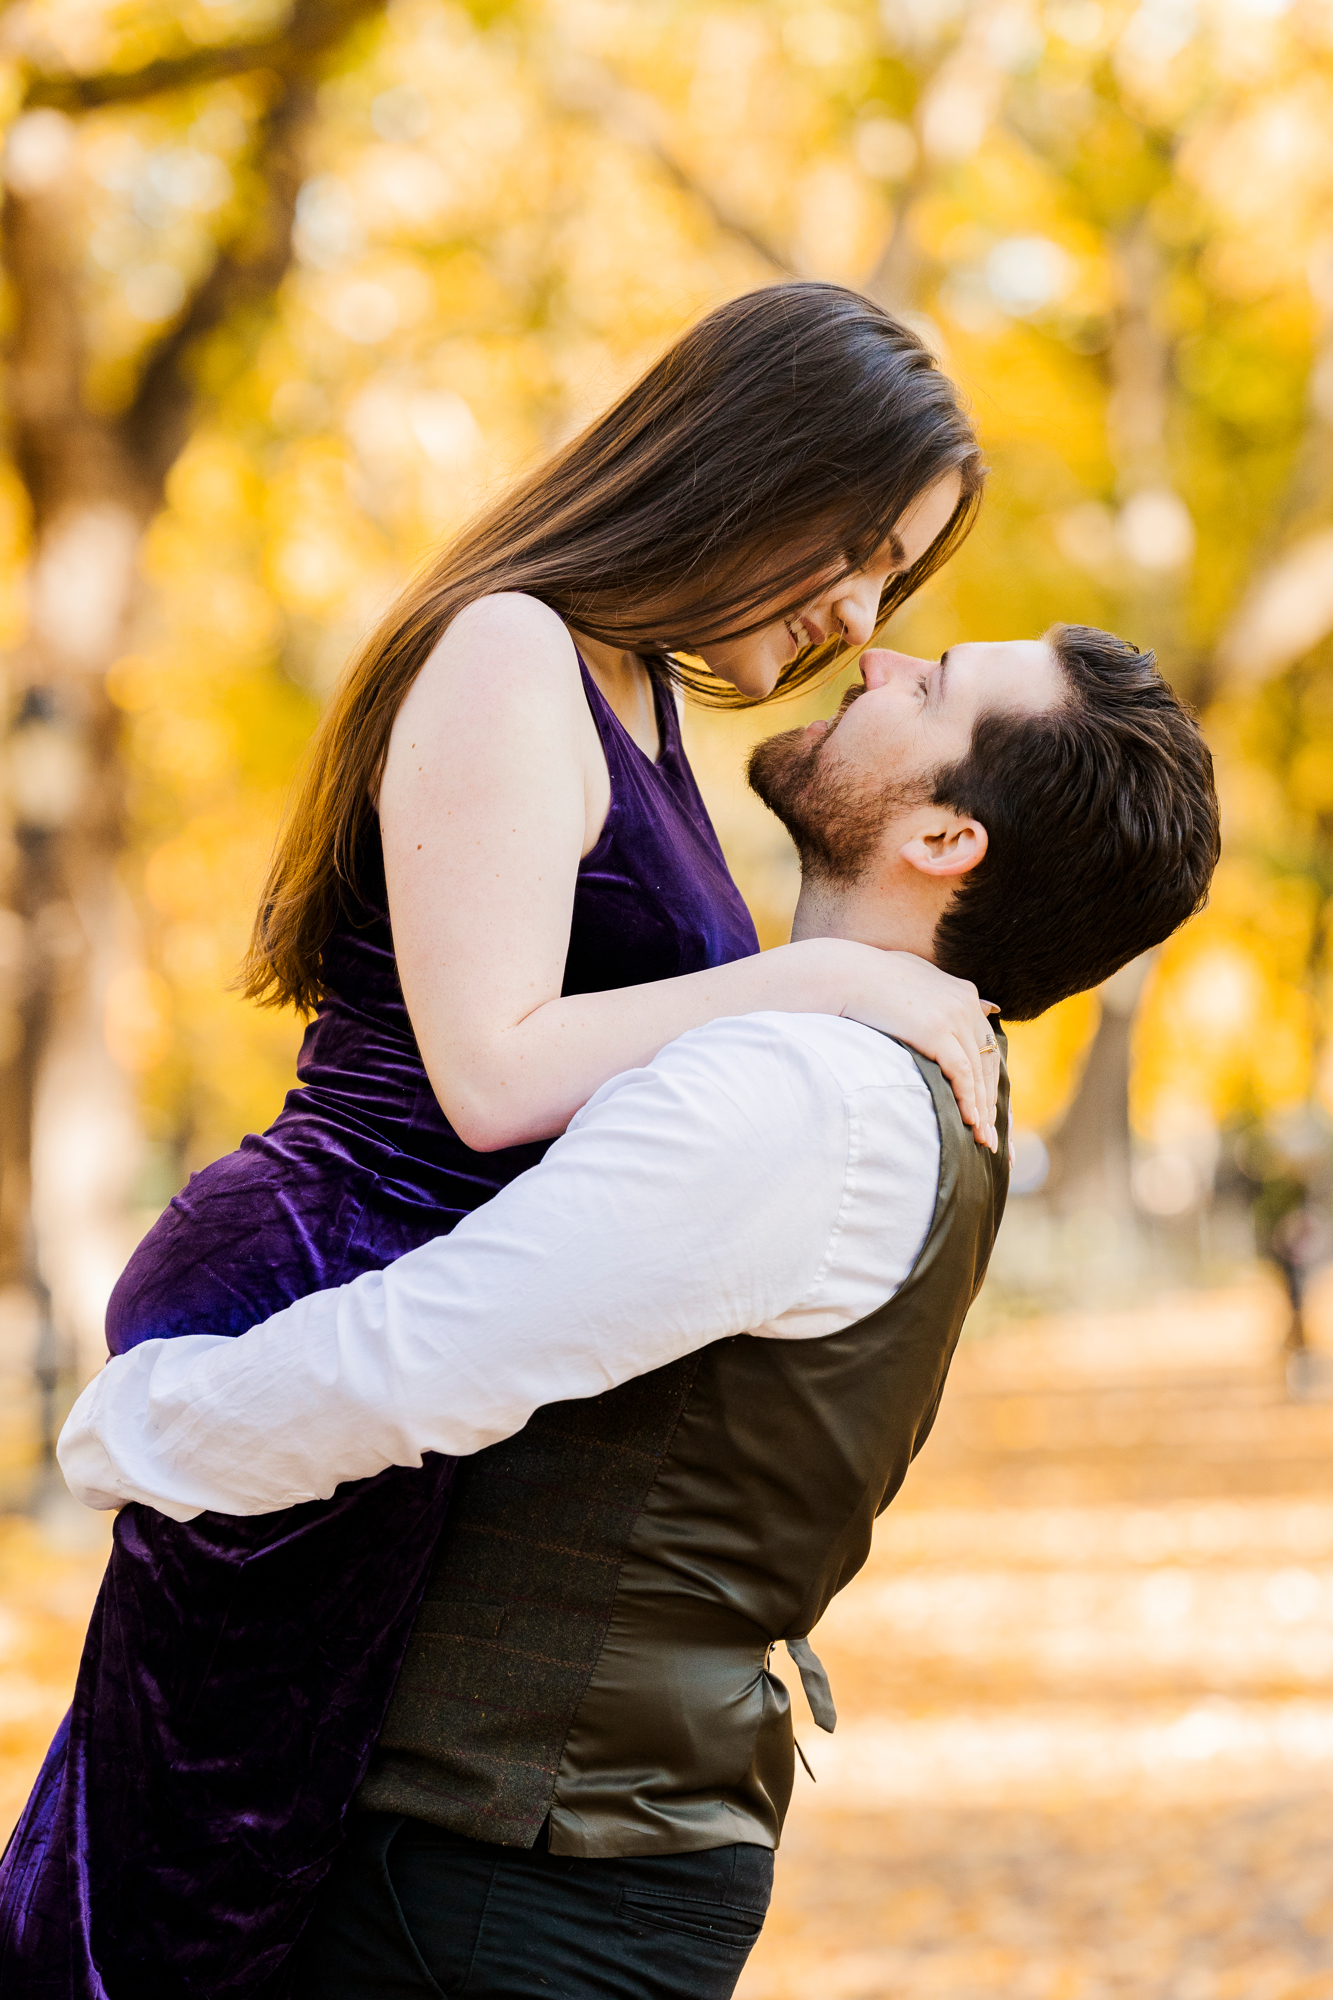 Magical Central Park Engagement Photography Session